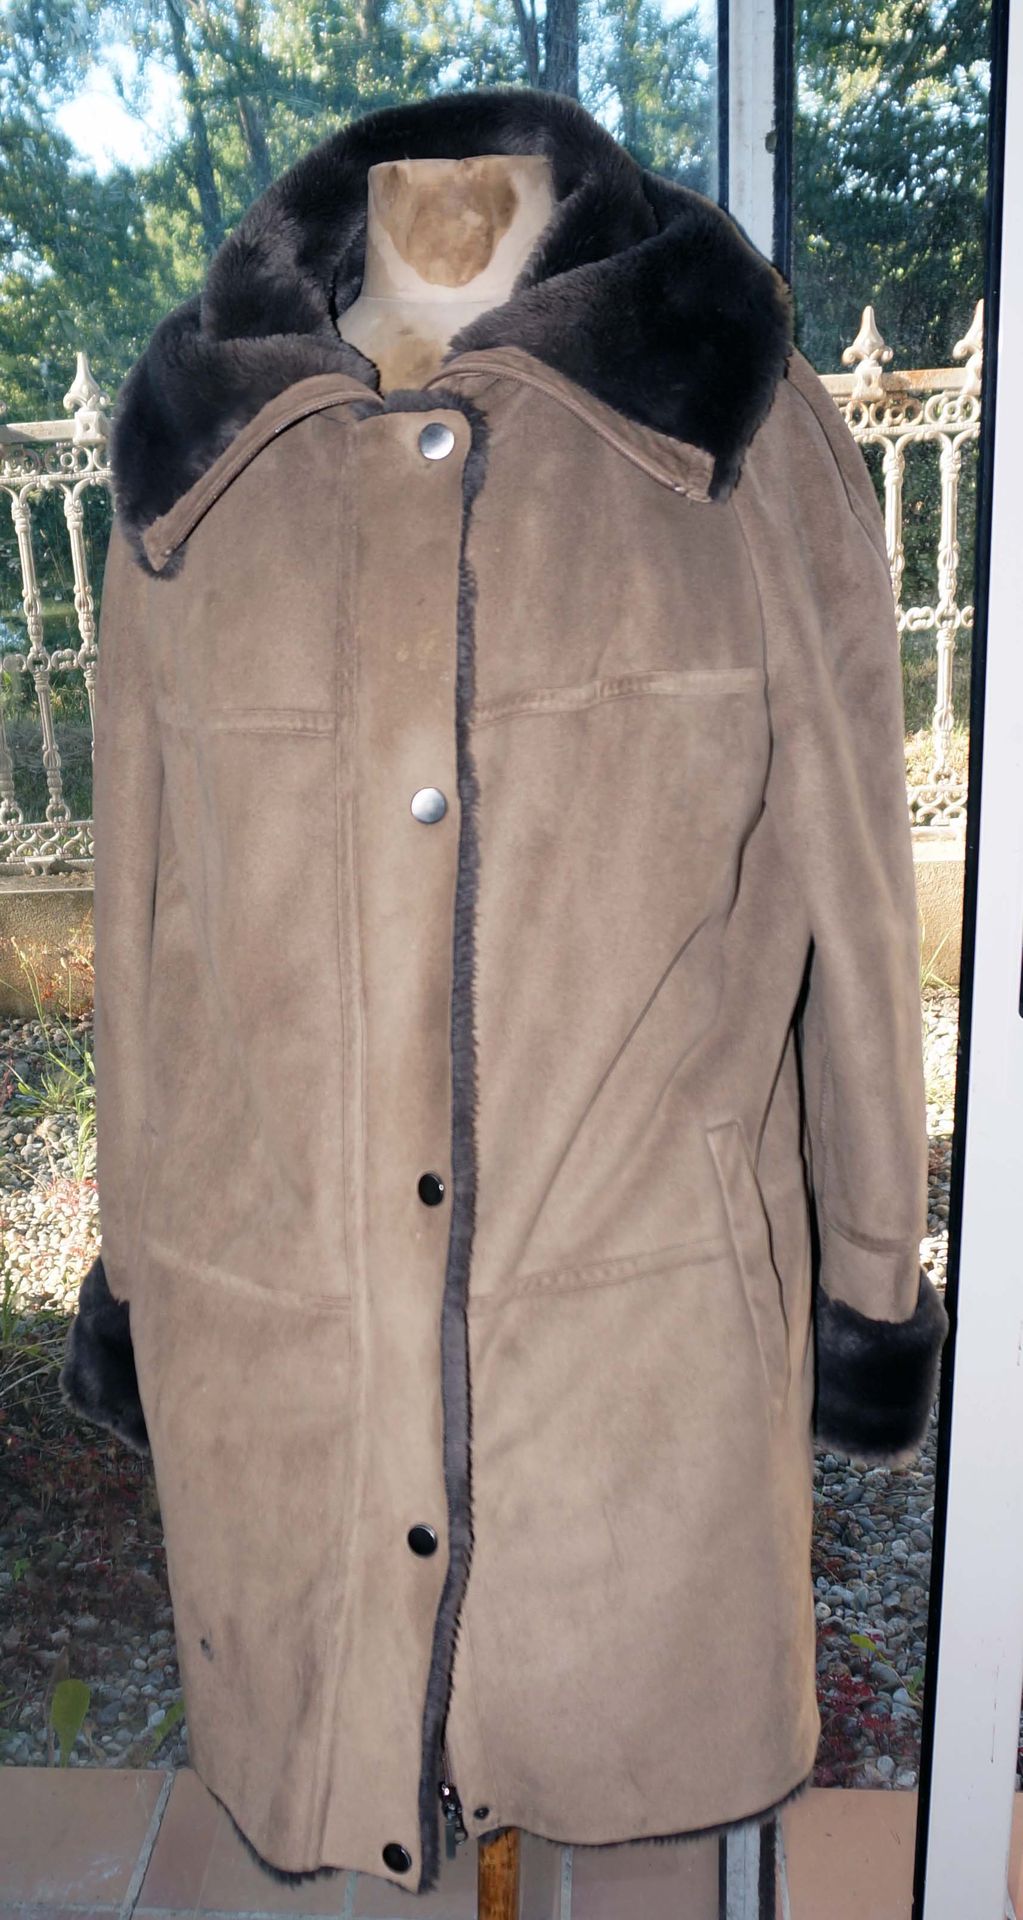 Null Imitation skin and fur coat, brown color. Size 48. New condition